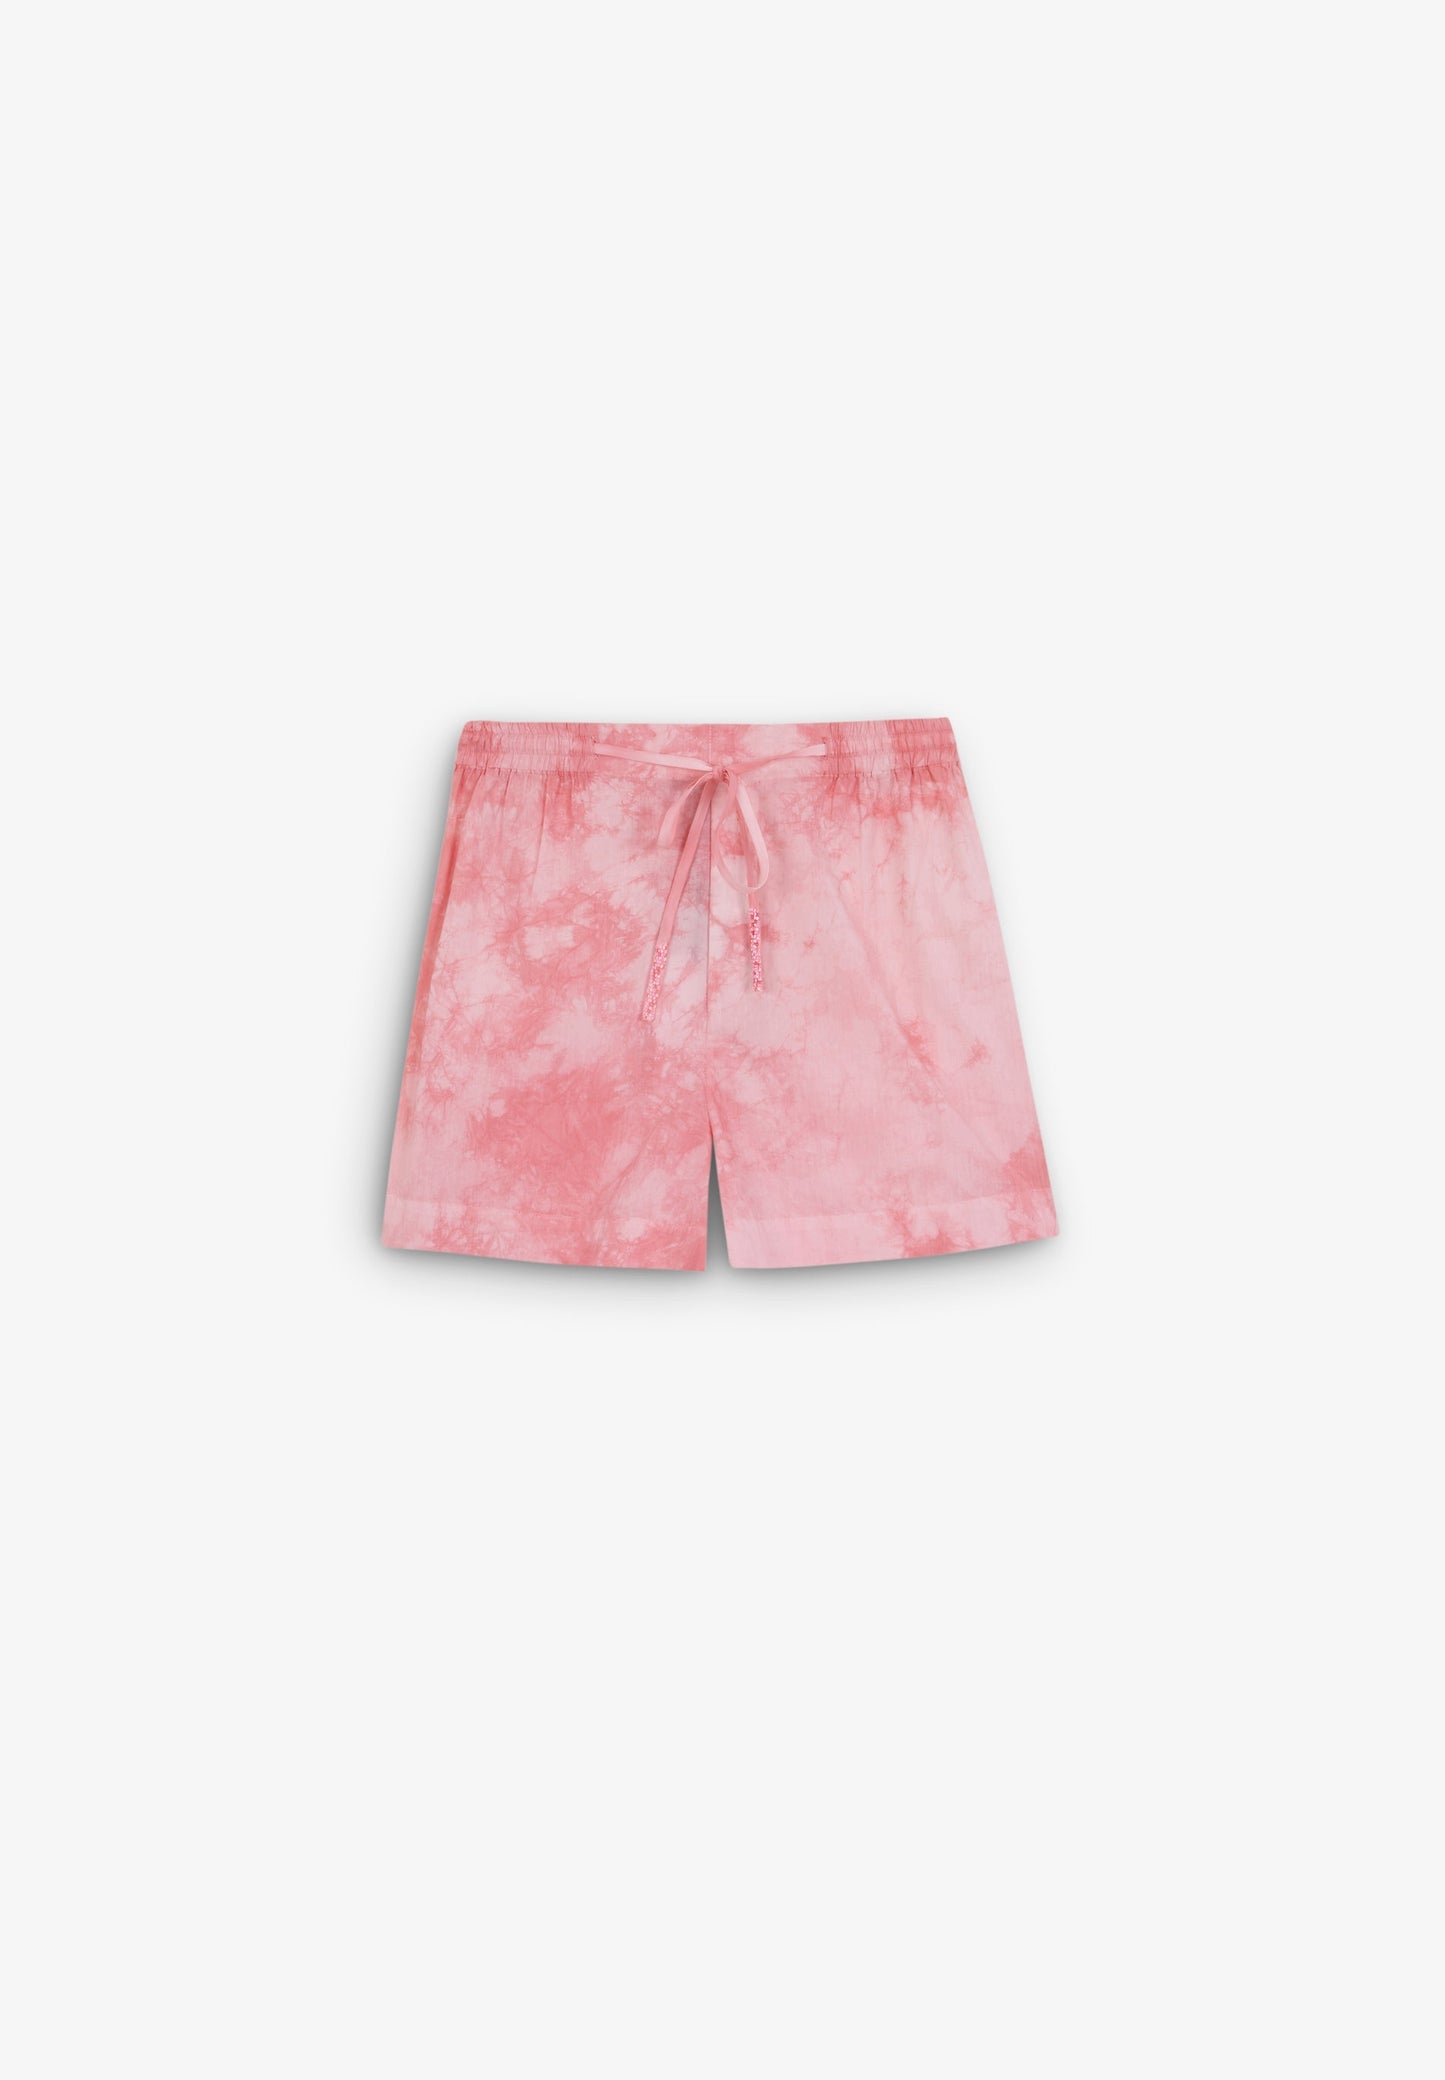 TIE-DYE SHORTS WITH BEADS